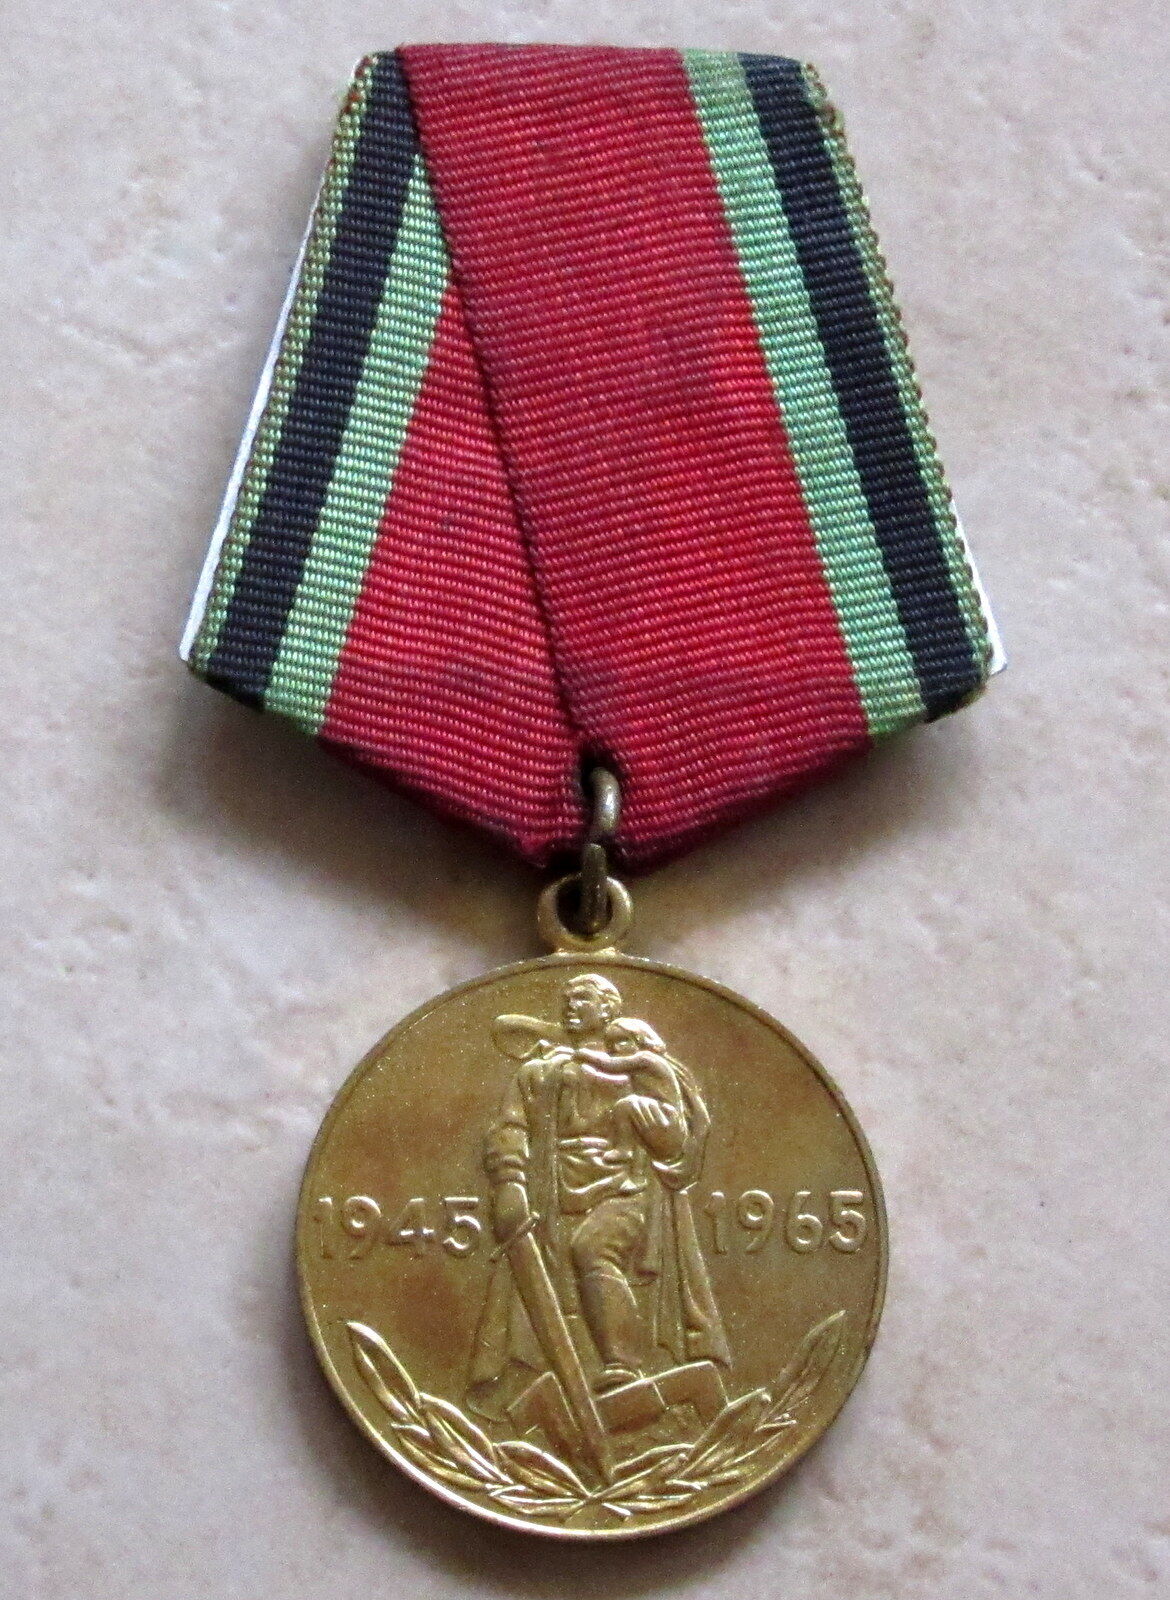 Russia Ussr Wwii Veteran Medal: 20 Years Victory Anniversary, 1945 - 1965